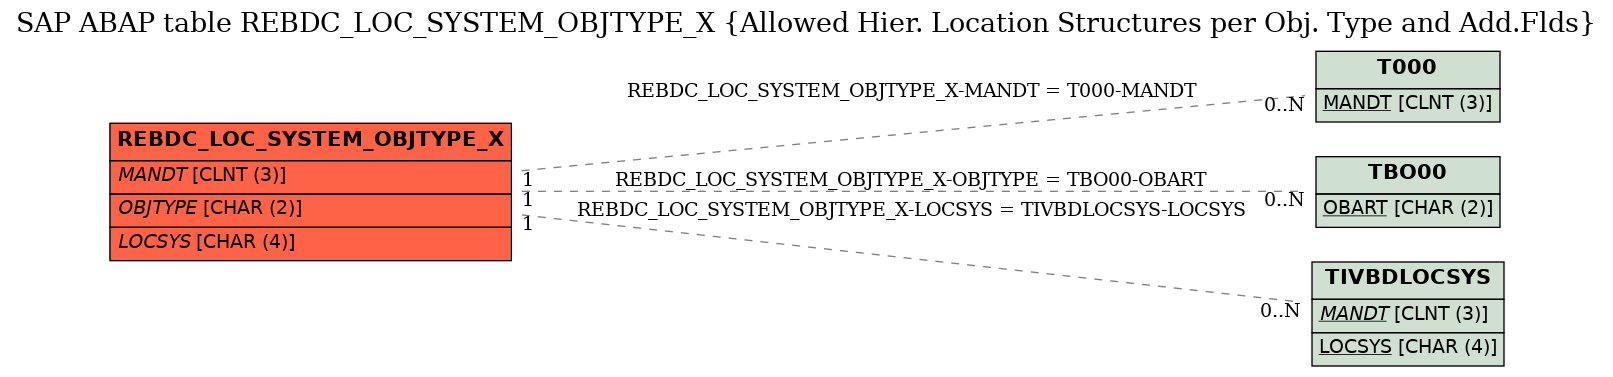 E-R Diagram for table REBDC_LOC_SYSTEM_OBJTYPE_X (Allowed Hier. Location Structures per Obj. Type and Add.Flds)